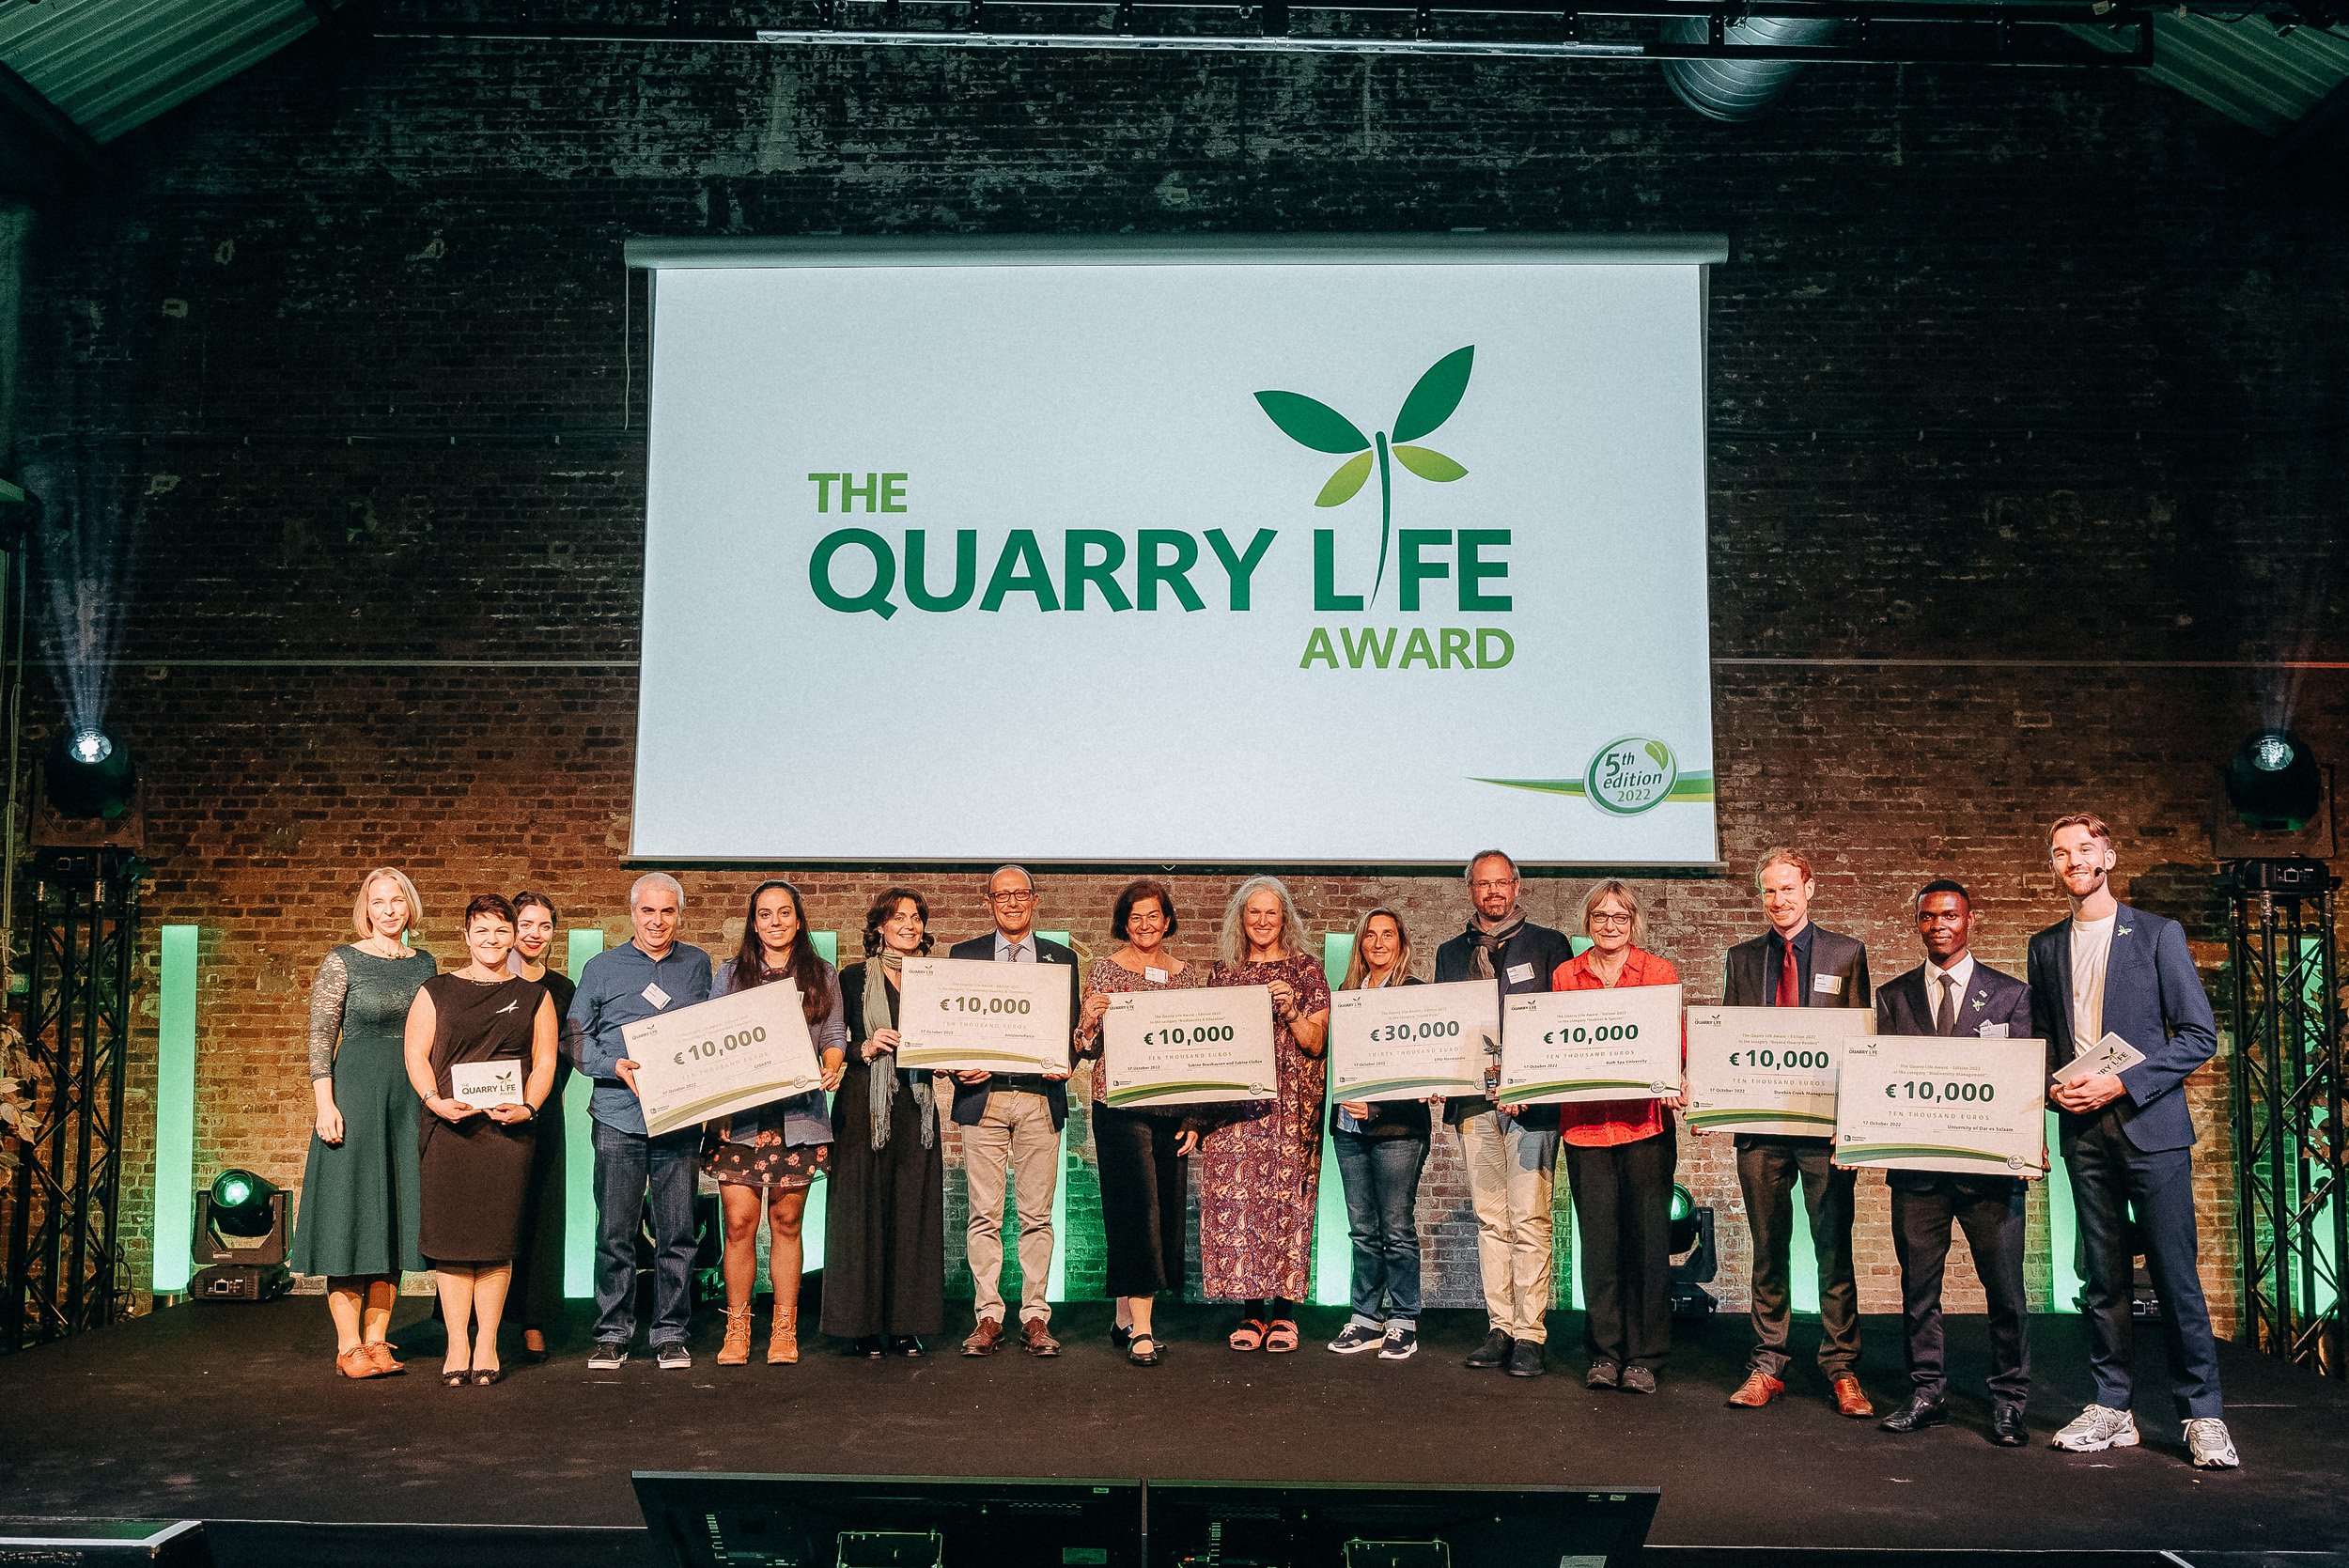 The winners of the Quarry Life Award 2022